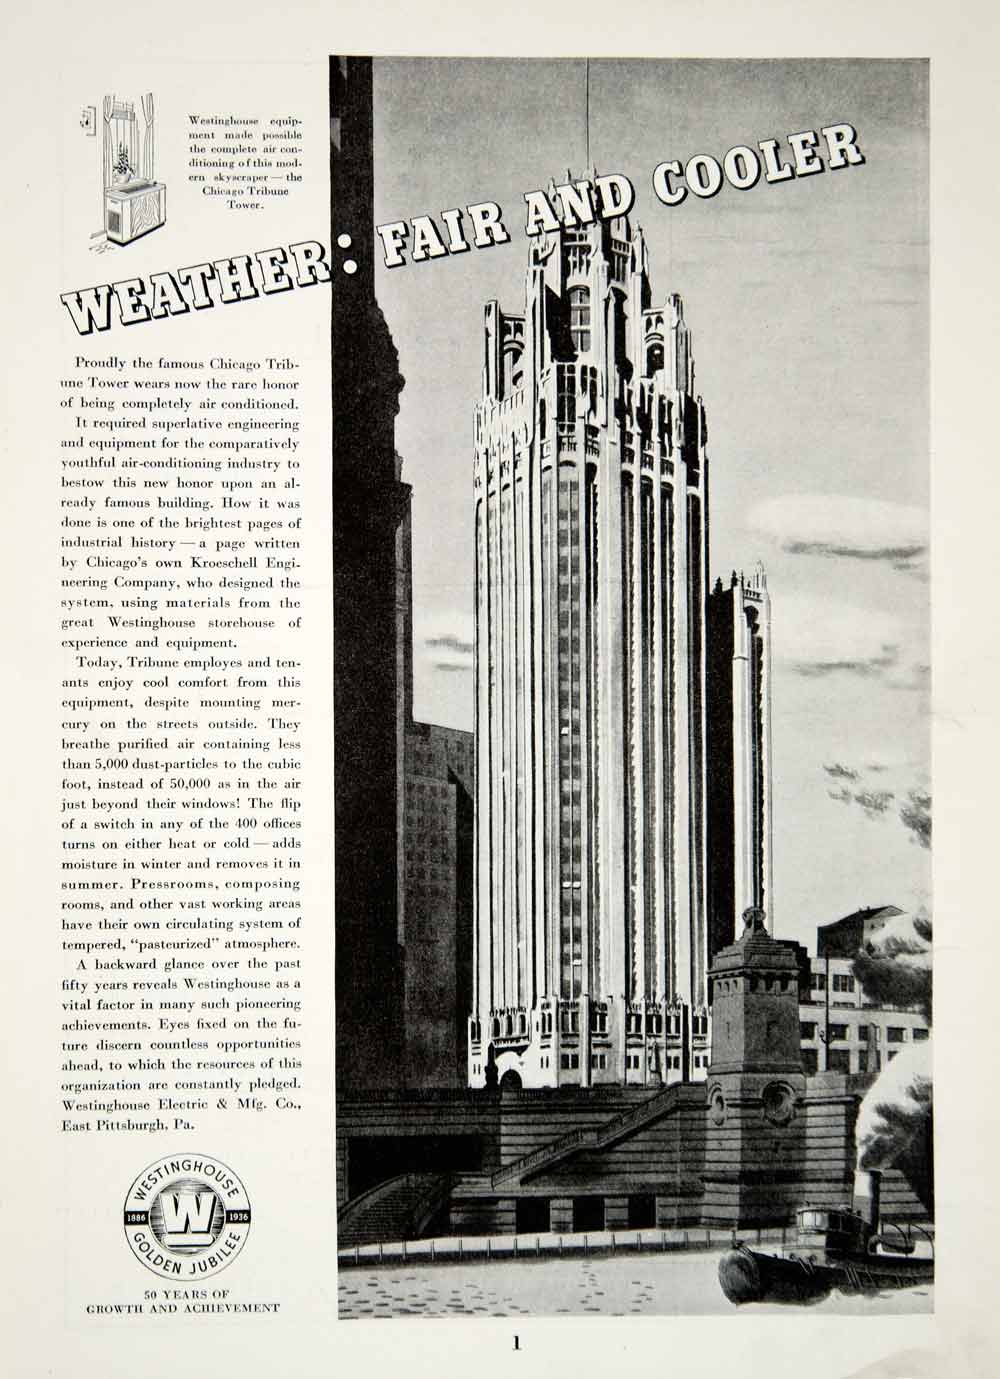 1936 Ad Westinghouse Company Air Conditioning Chicago Tribune Tower Advertising